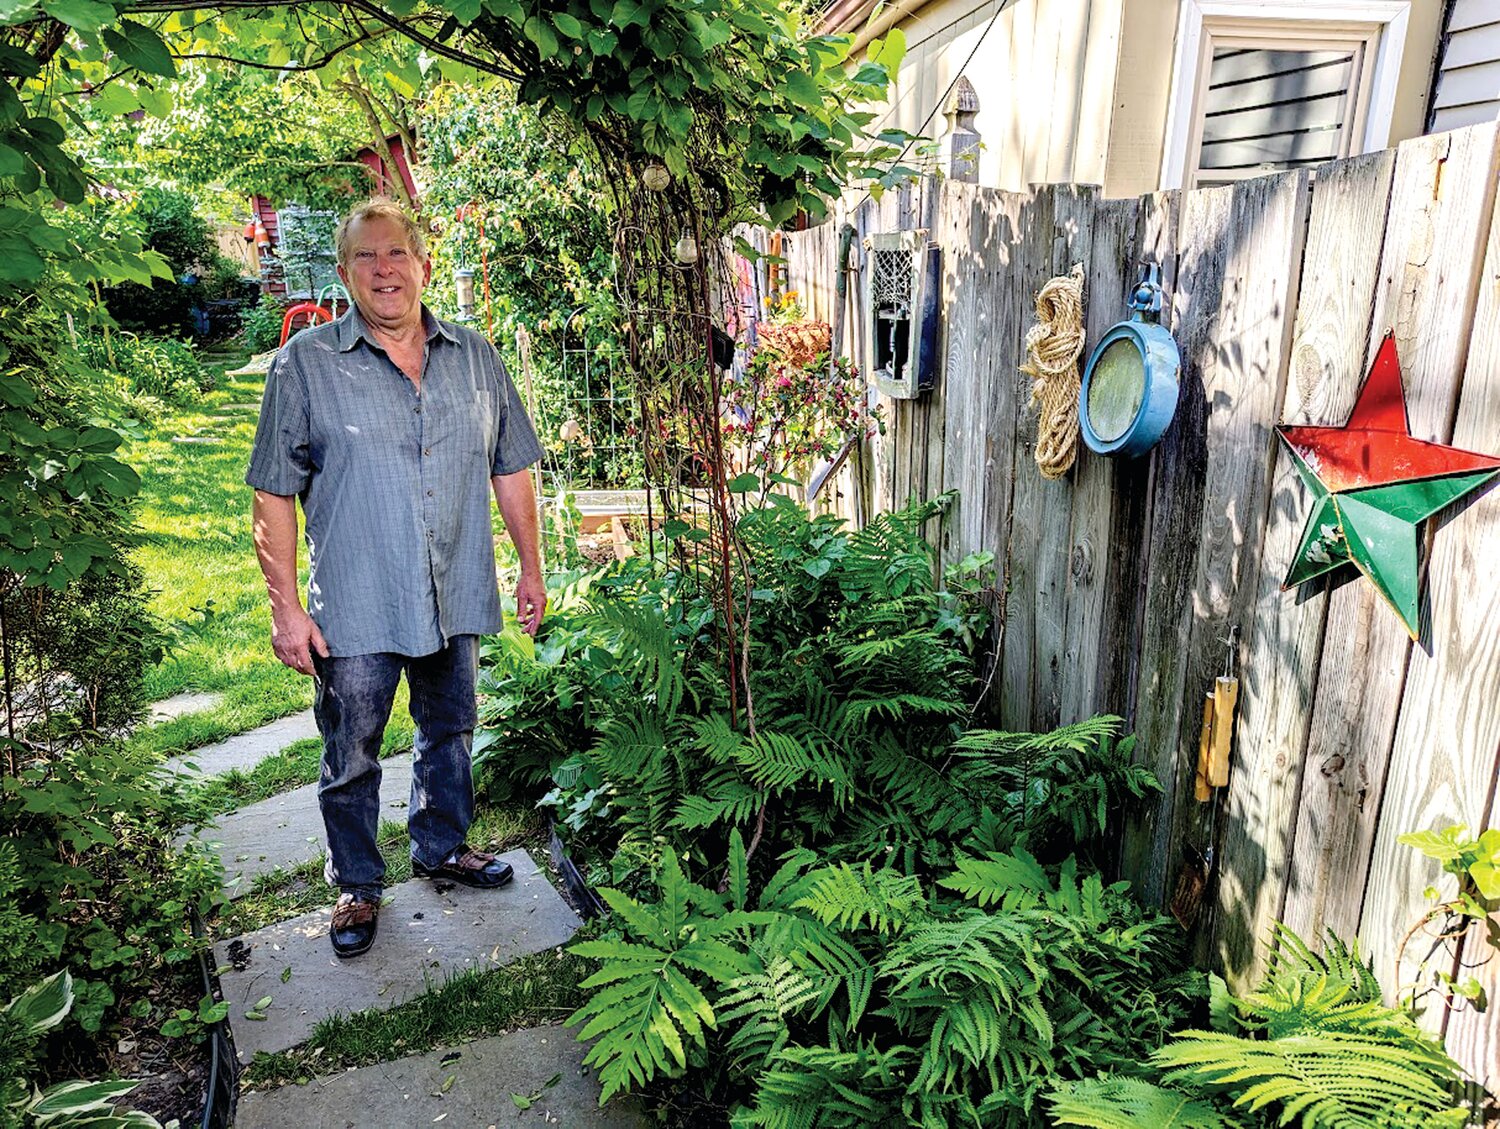 Rene Marinich and Stephen Harris have opened their garden on Perry Street for the tour.